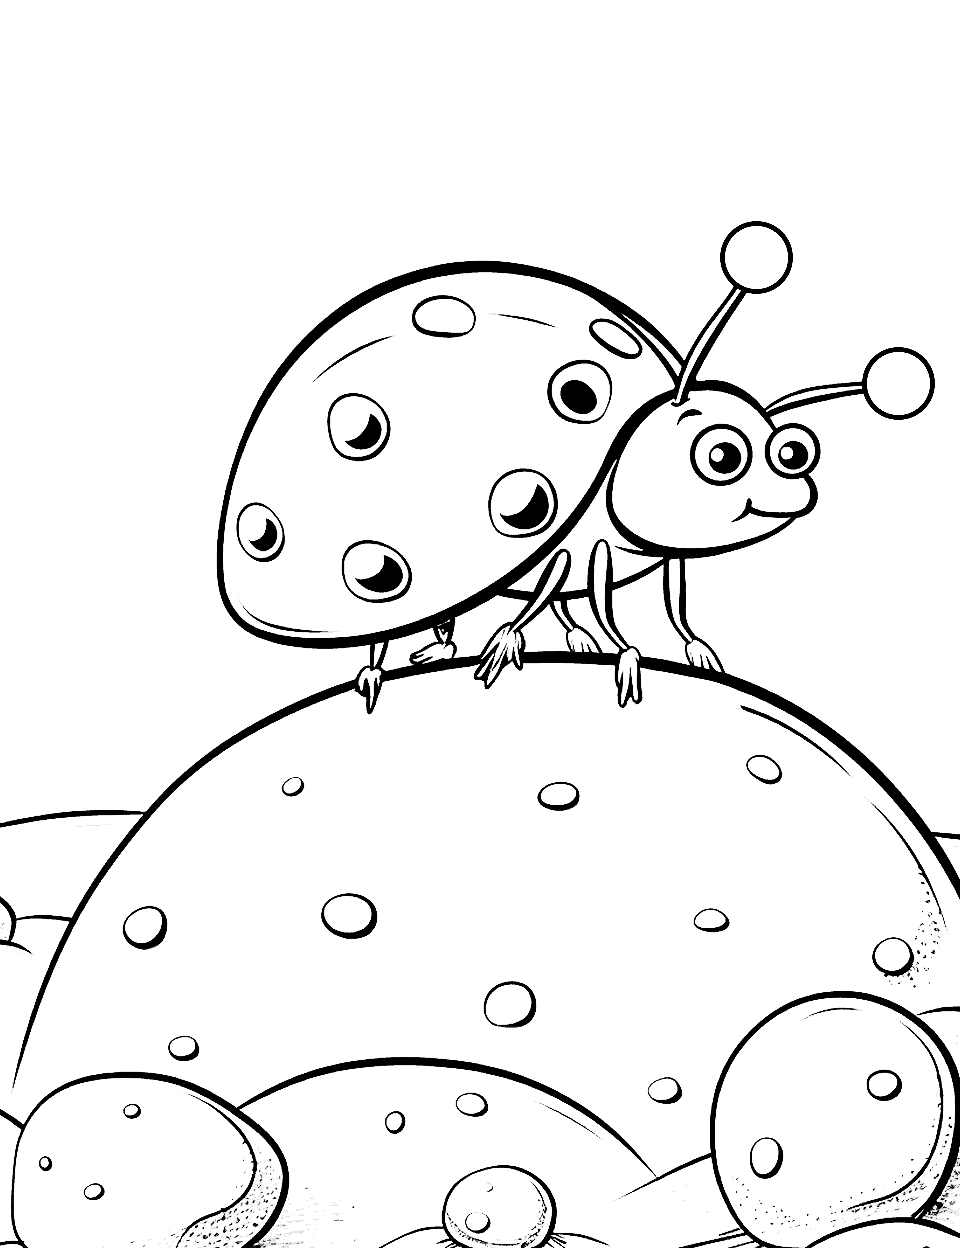 Seven-Spot Ladybird on a Journey Coloring Page - A Seven-spot ladybird trekking across a series of small stones.